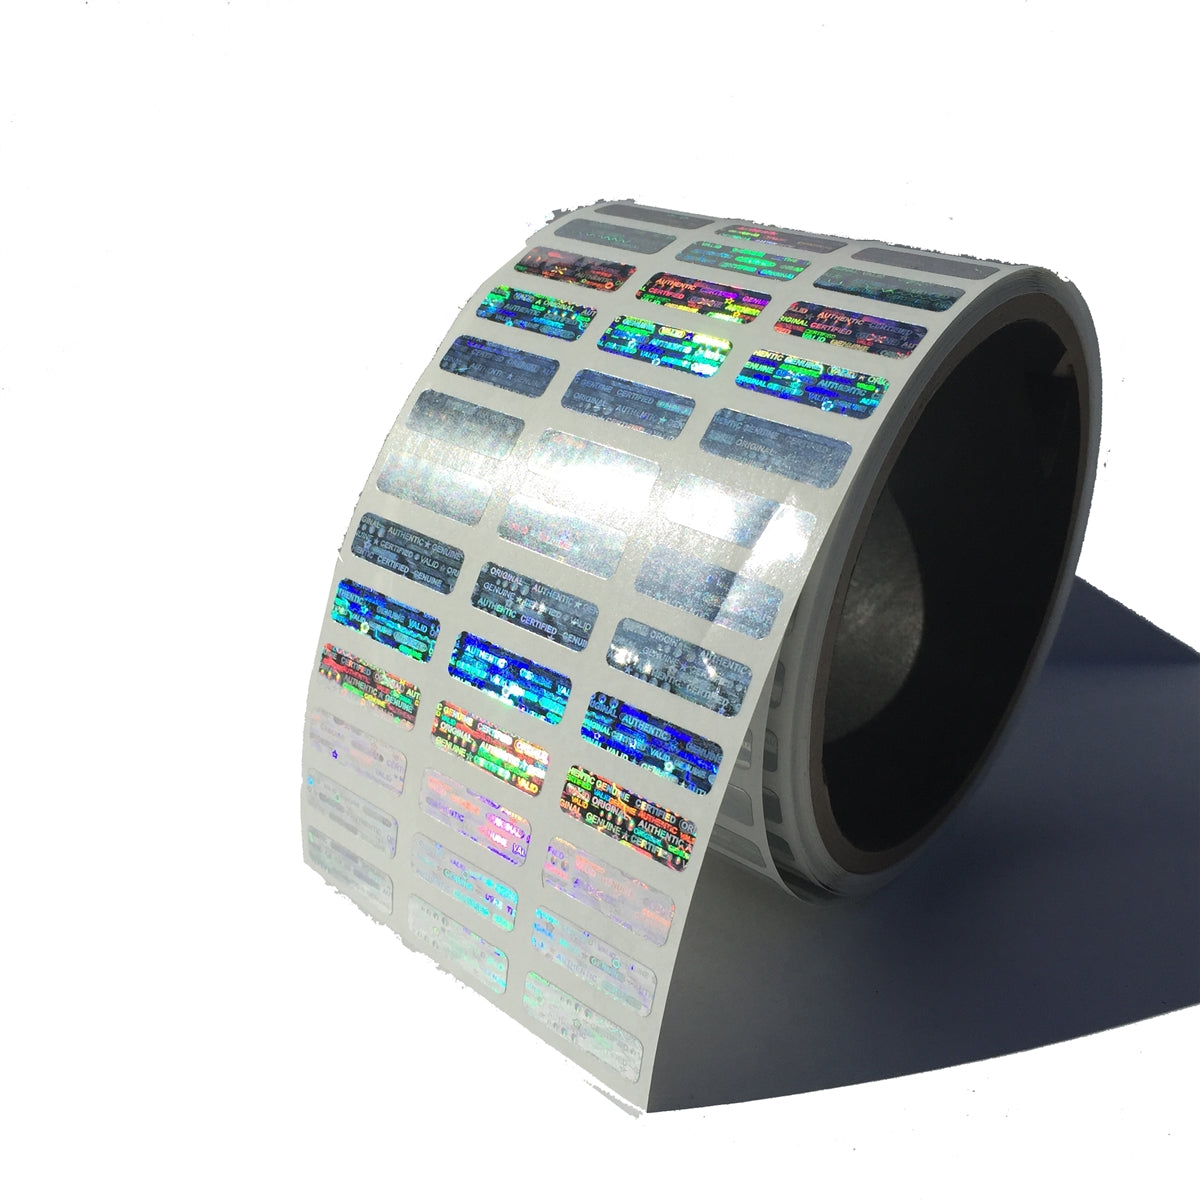 10,000 Silver Tamper Evident Holographic Security Label Seal Sticker, Rectangle 1" x 0.375" (25mm x 9mm).